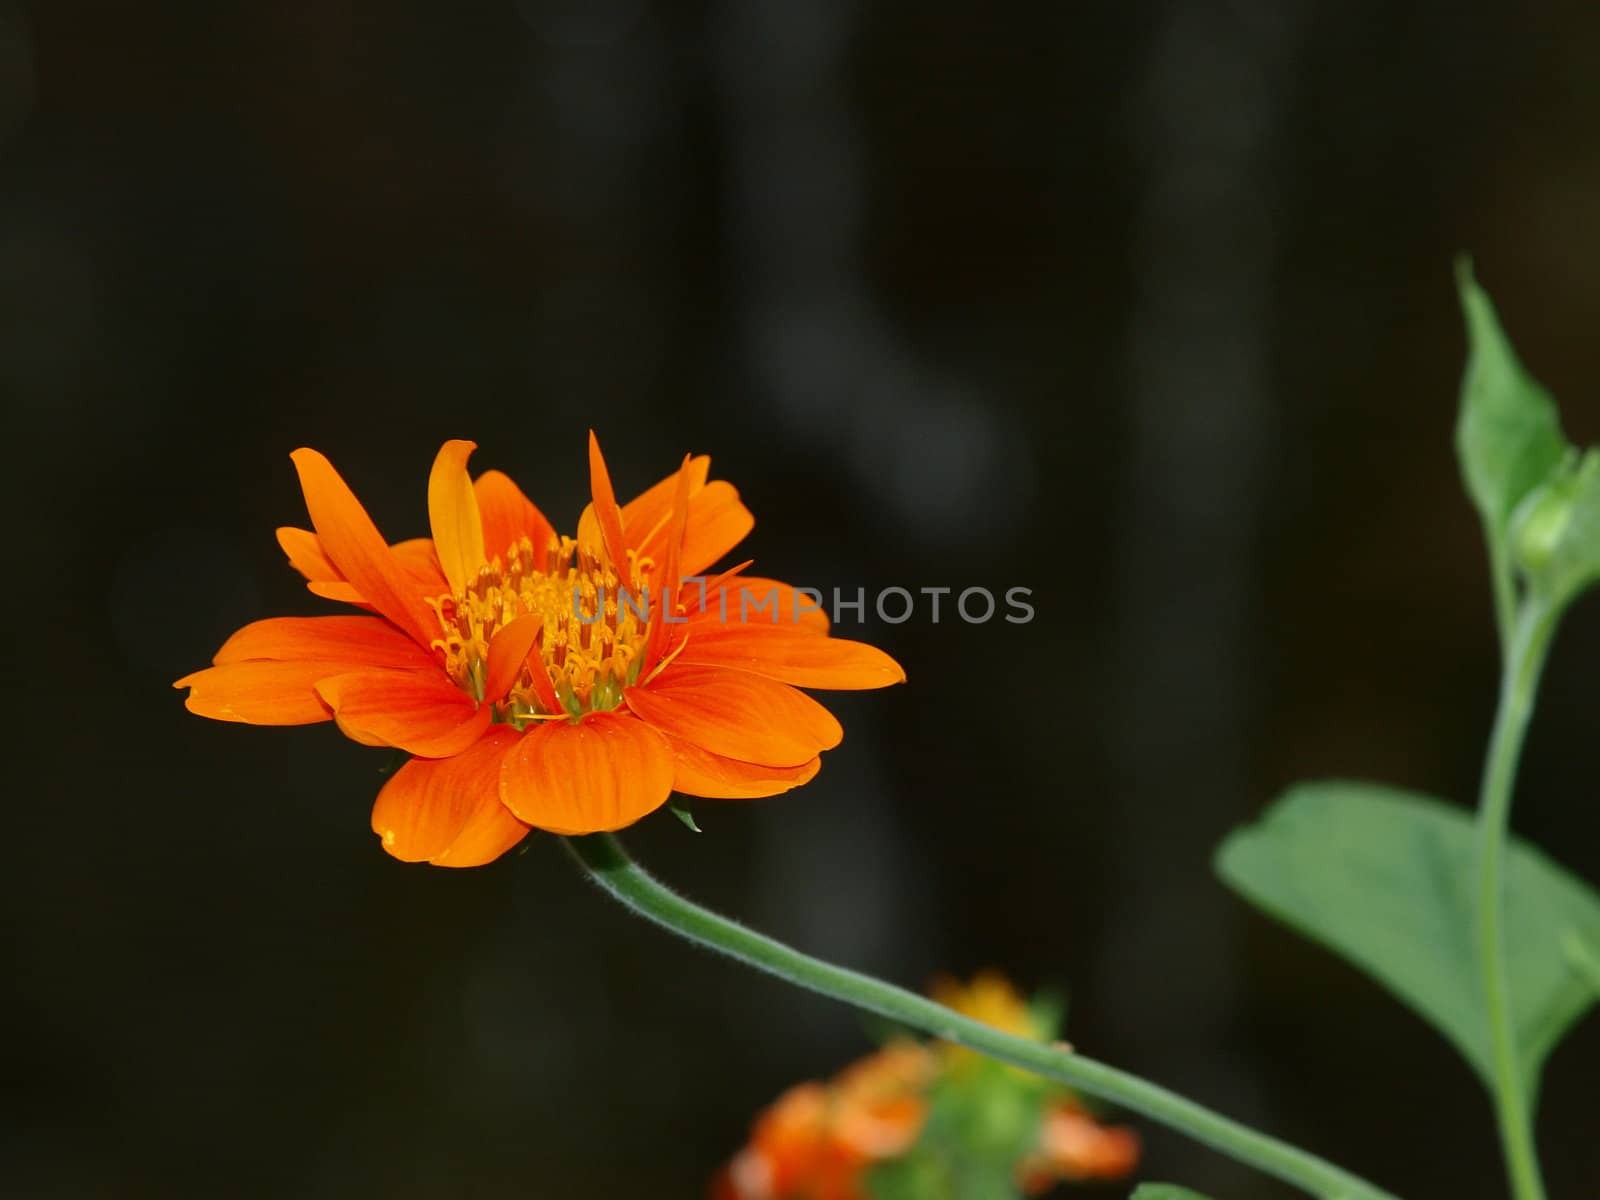 A close up of a Mexican Sunflower by jakgree